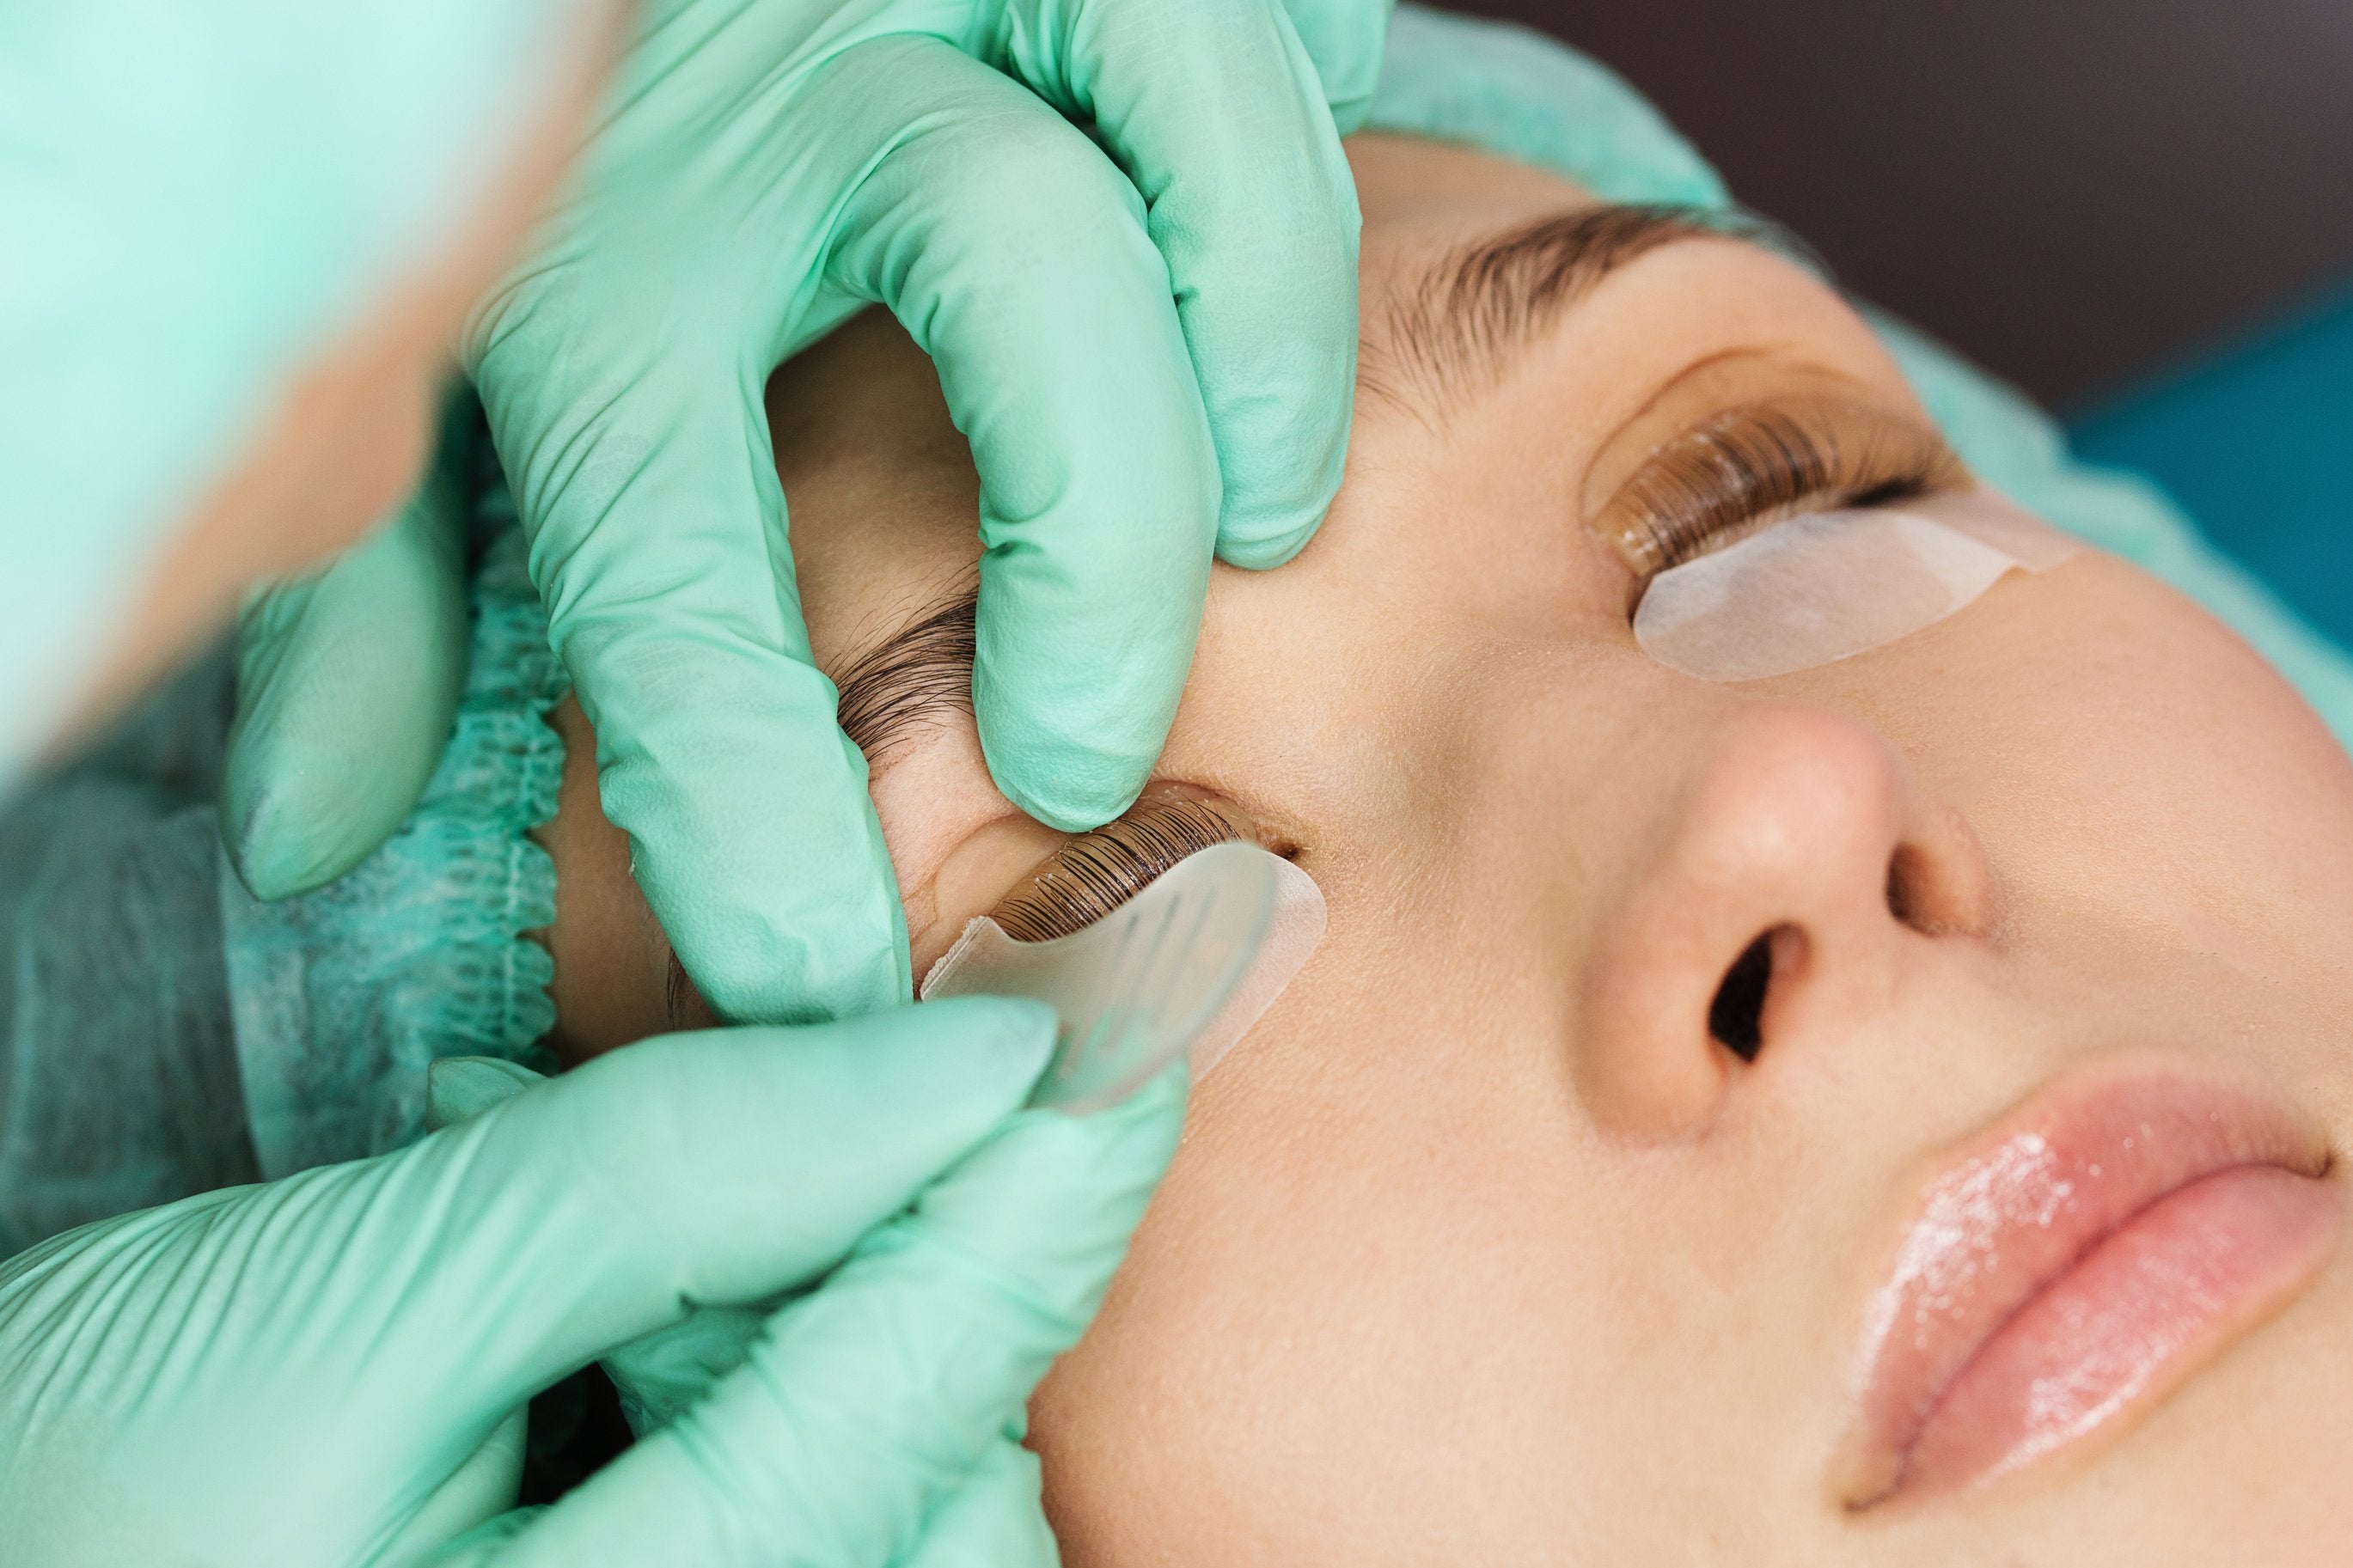 What is a Lash Lift? The Process, Price, Results & Risks